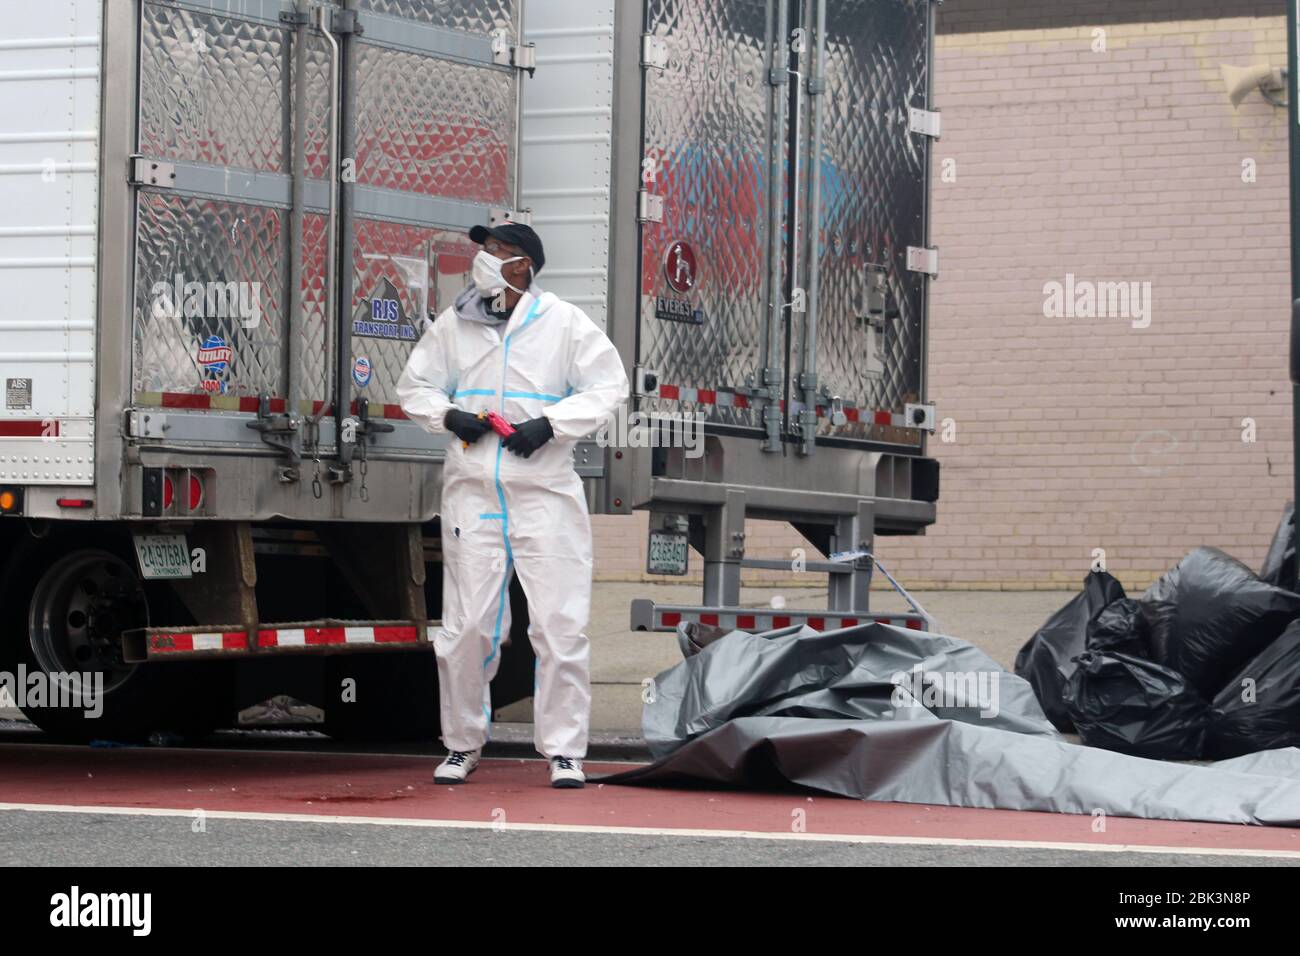 New York, New York, USA. 30th Apr, 2020. This man, dressed in a hazmat and masked face, stands in front of the doors of 2 big refrigerated trucks drove to the Andrew T. Cleckley Funeral Home in Brooklyn where corpses not properly cared have been removed. 60 bodies were stored in 4 non-refregerated vehiciles lining the street nearby stores. Neighbors reported a foul smell still persistent and fluids dripping from the trucks. The funeral home was overwhelmed by COVID-19 deaths, waiting for weeks for cremations in New York. Credit: Marie Le Ble/ZUMA Wire/Alamy Live News Stock Photo